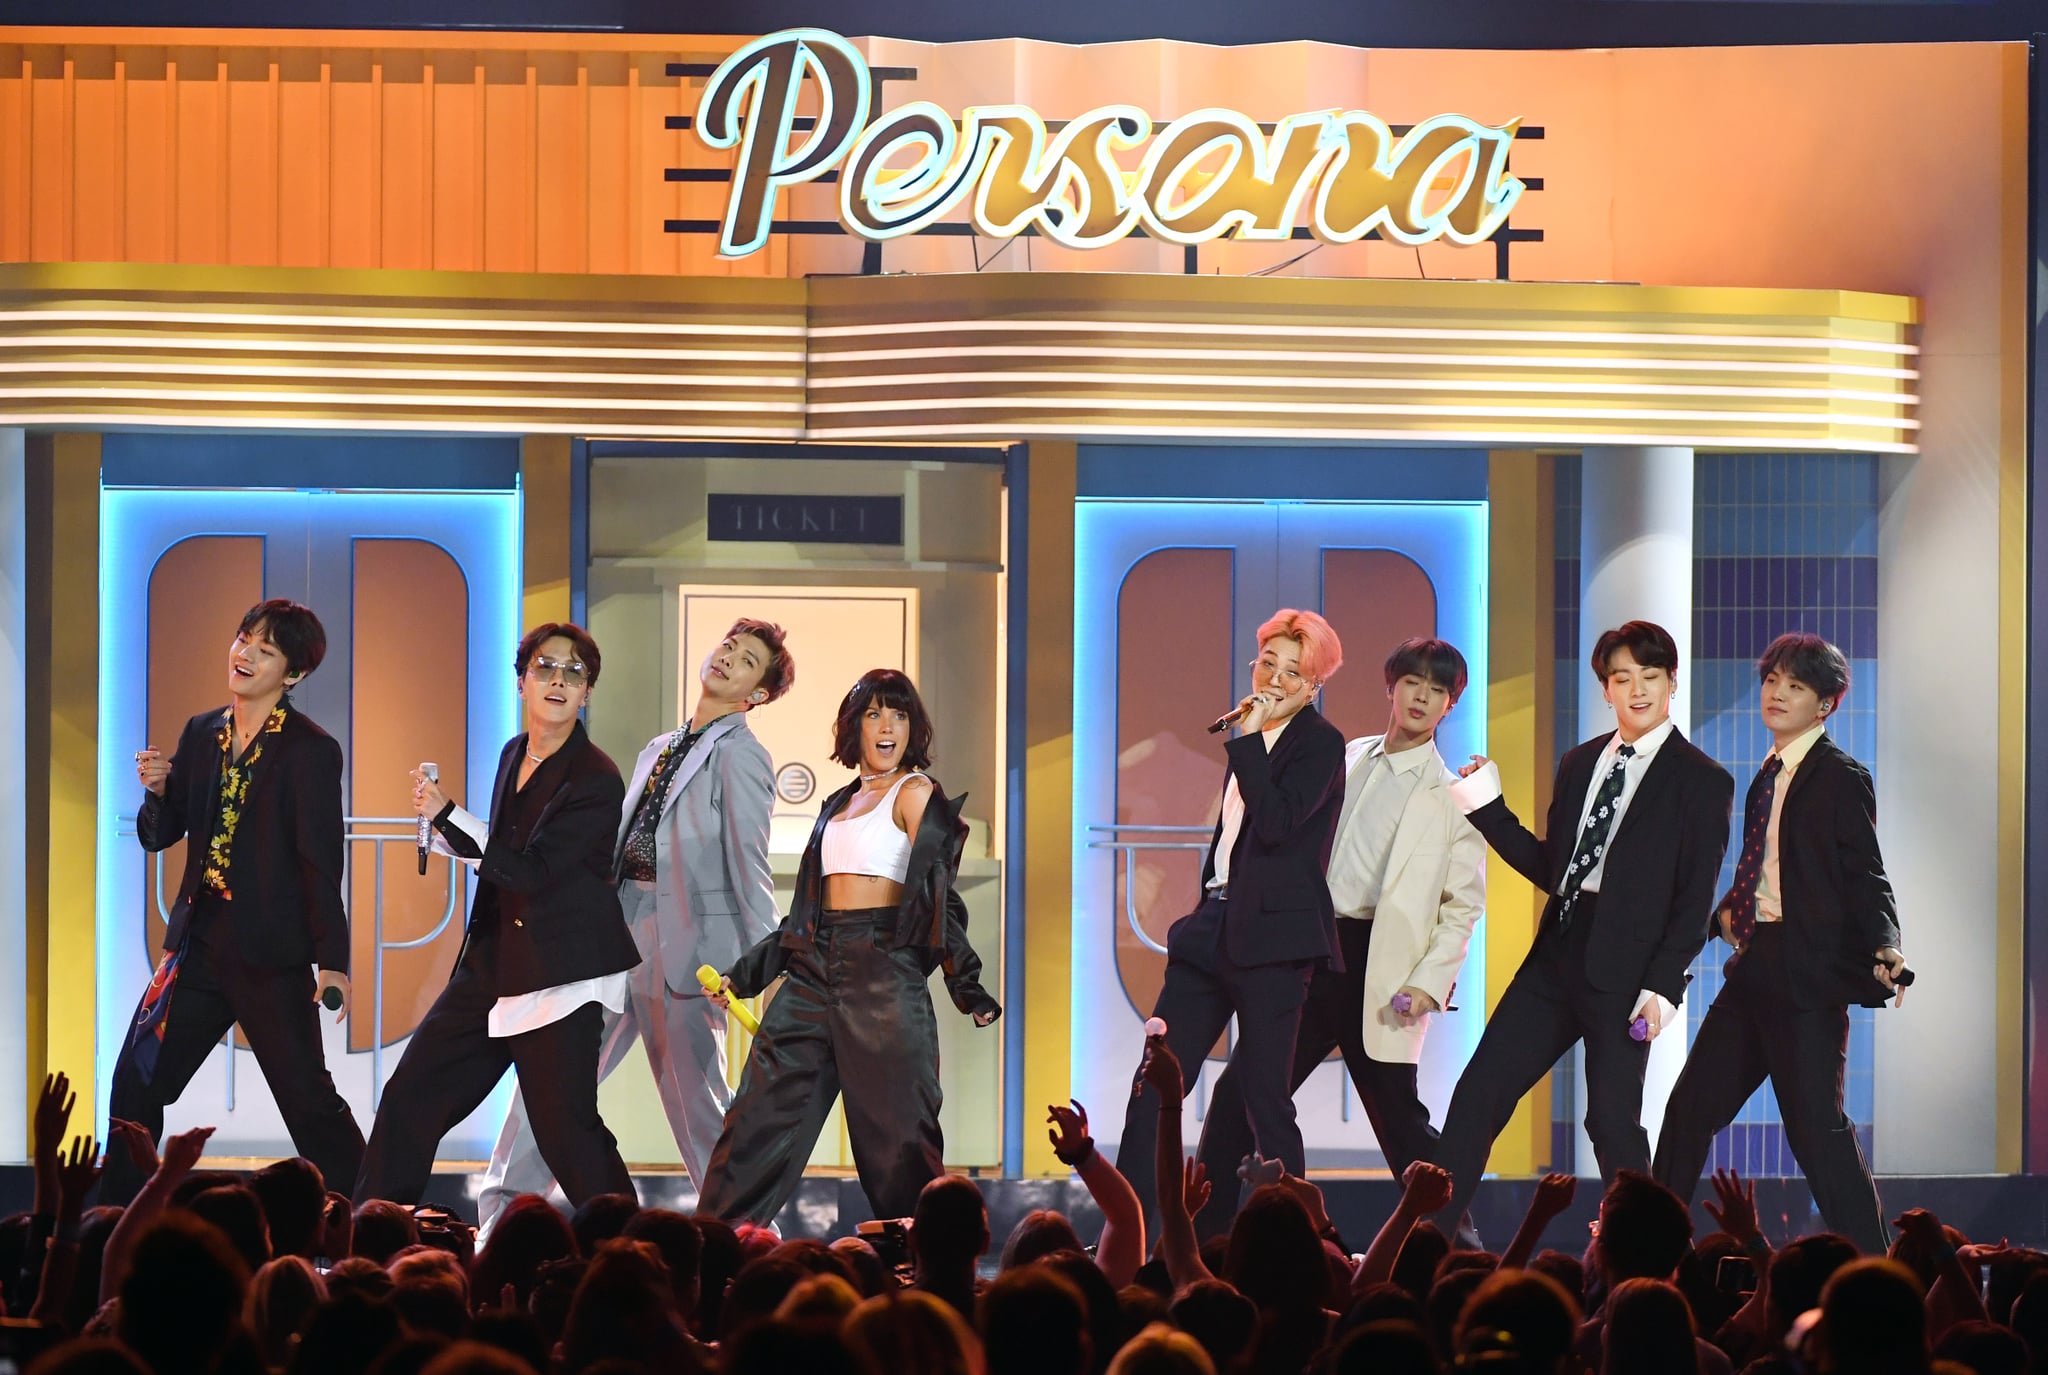 LAS VEGAS, NEVADA - MAY 1: Halsey (4th L) and BTS perform at the 2019 Billboard Music Awards at the MGM Grand Garden Arena on May 1, 2019 in Las Vegas, Nevada.  (Photo by Ethan Miller / Getty Images)